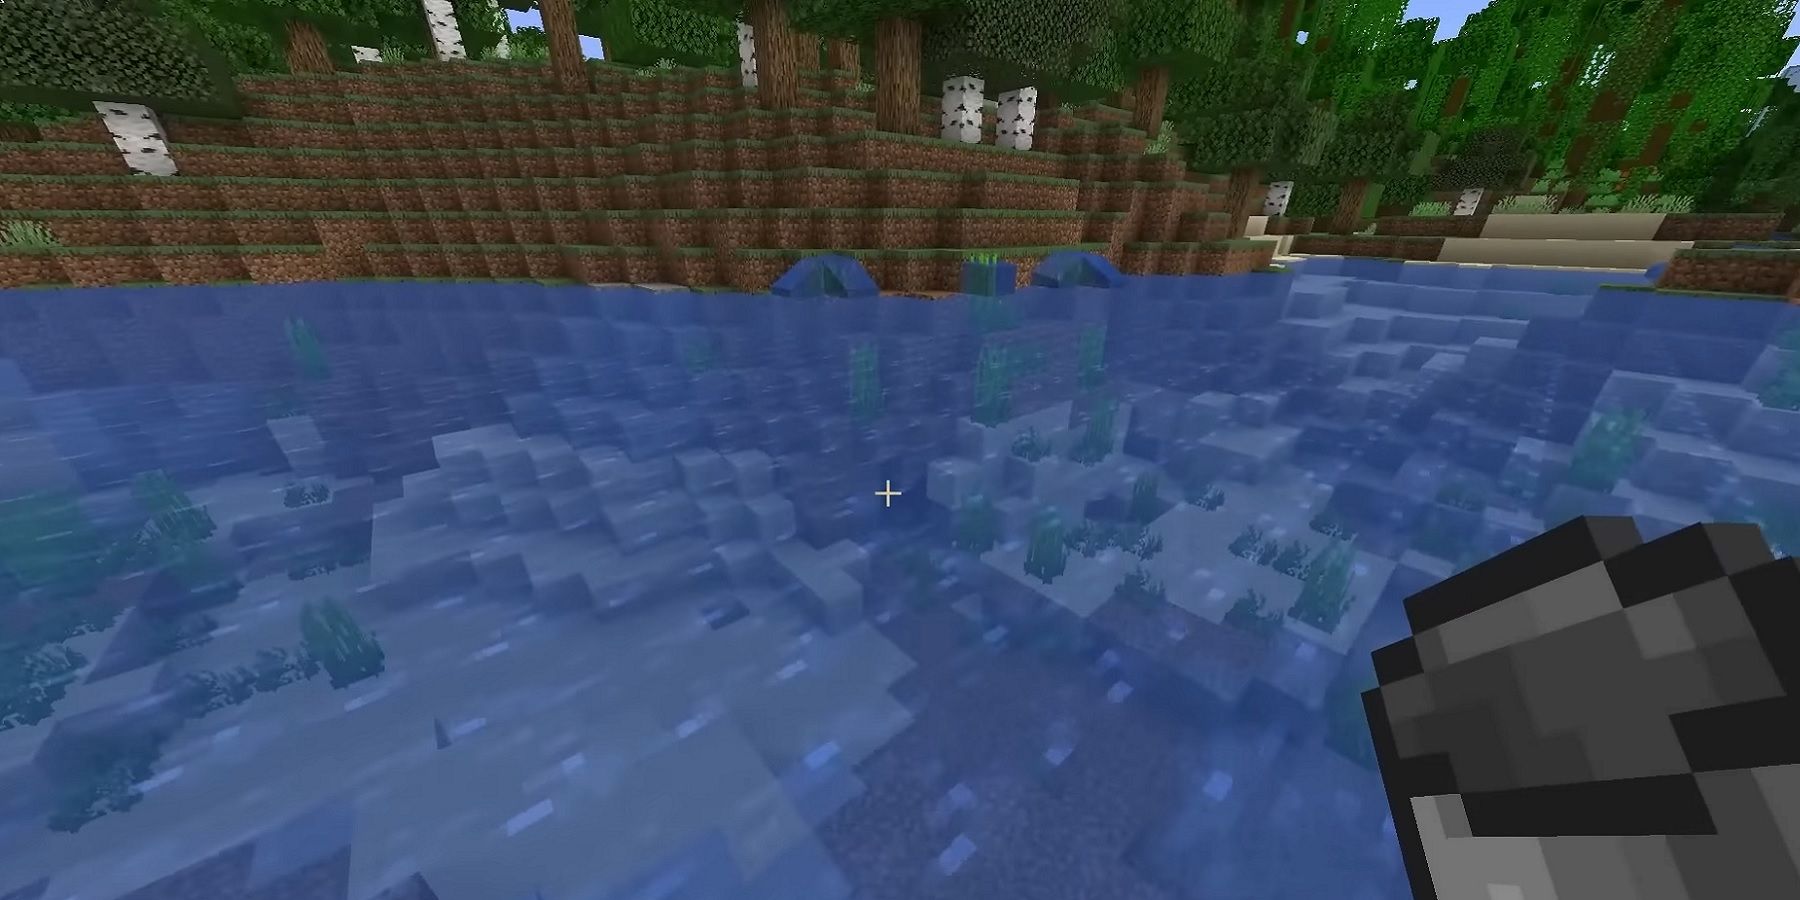 A screenshot from Minecraft showing a bucket about to go into a river.